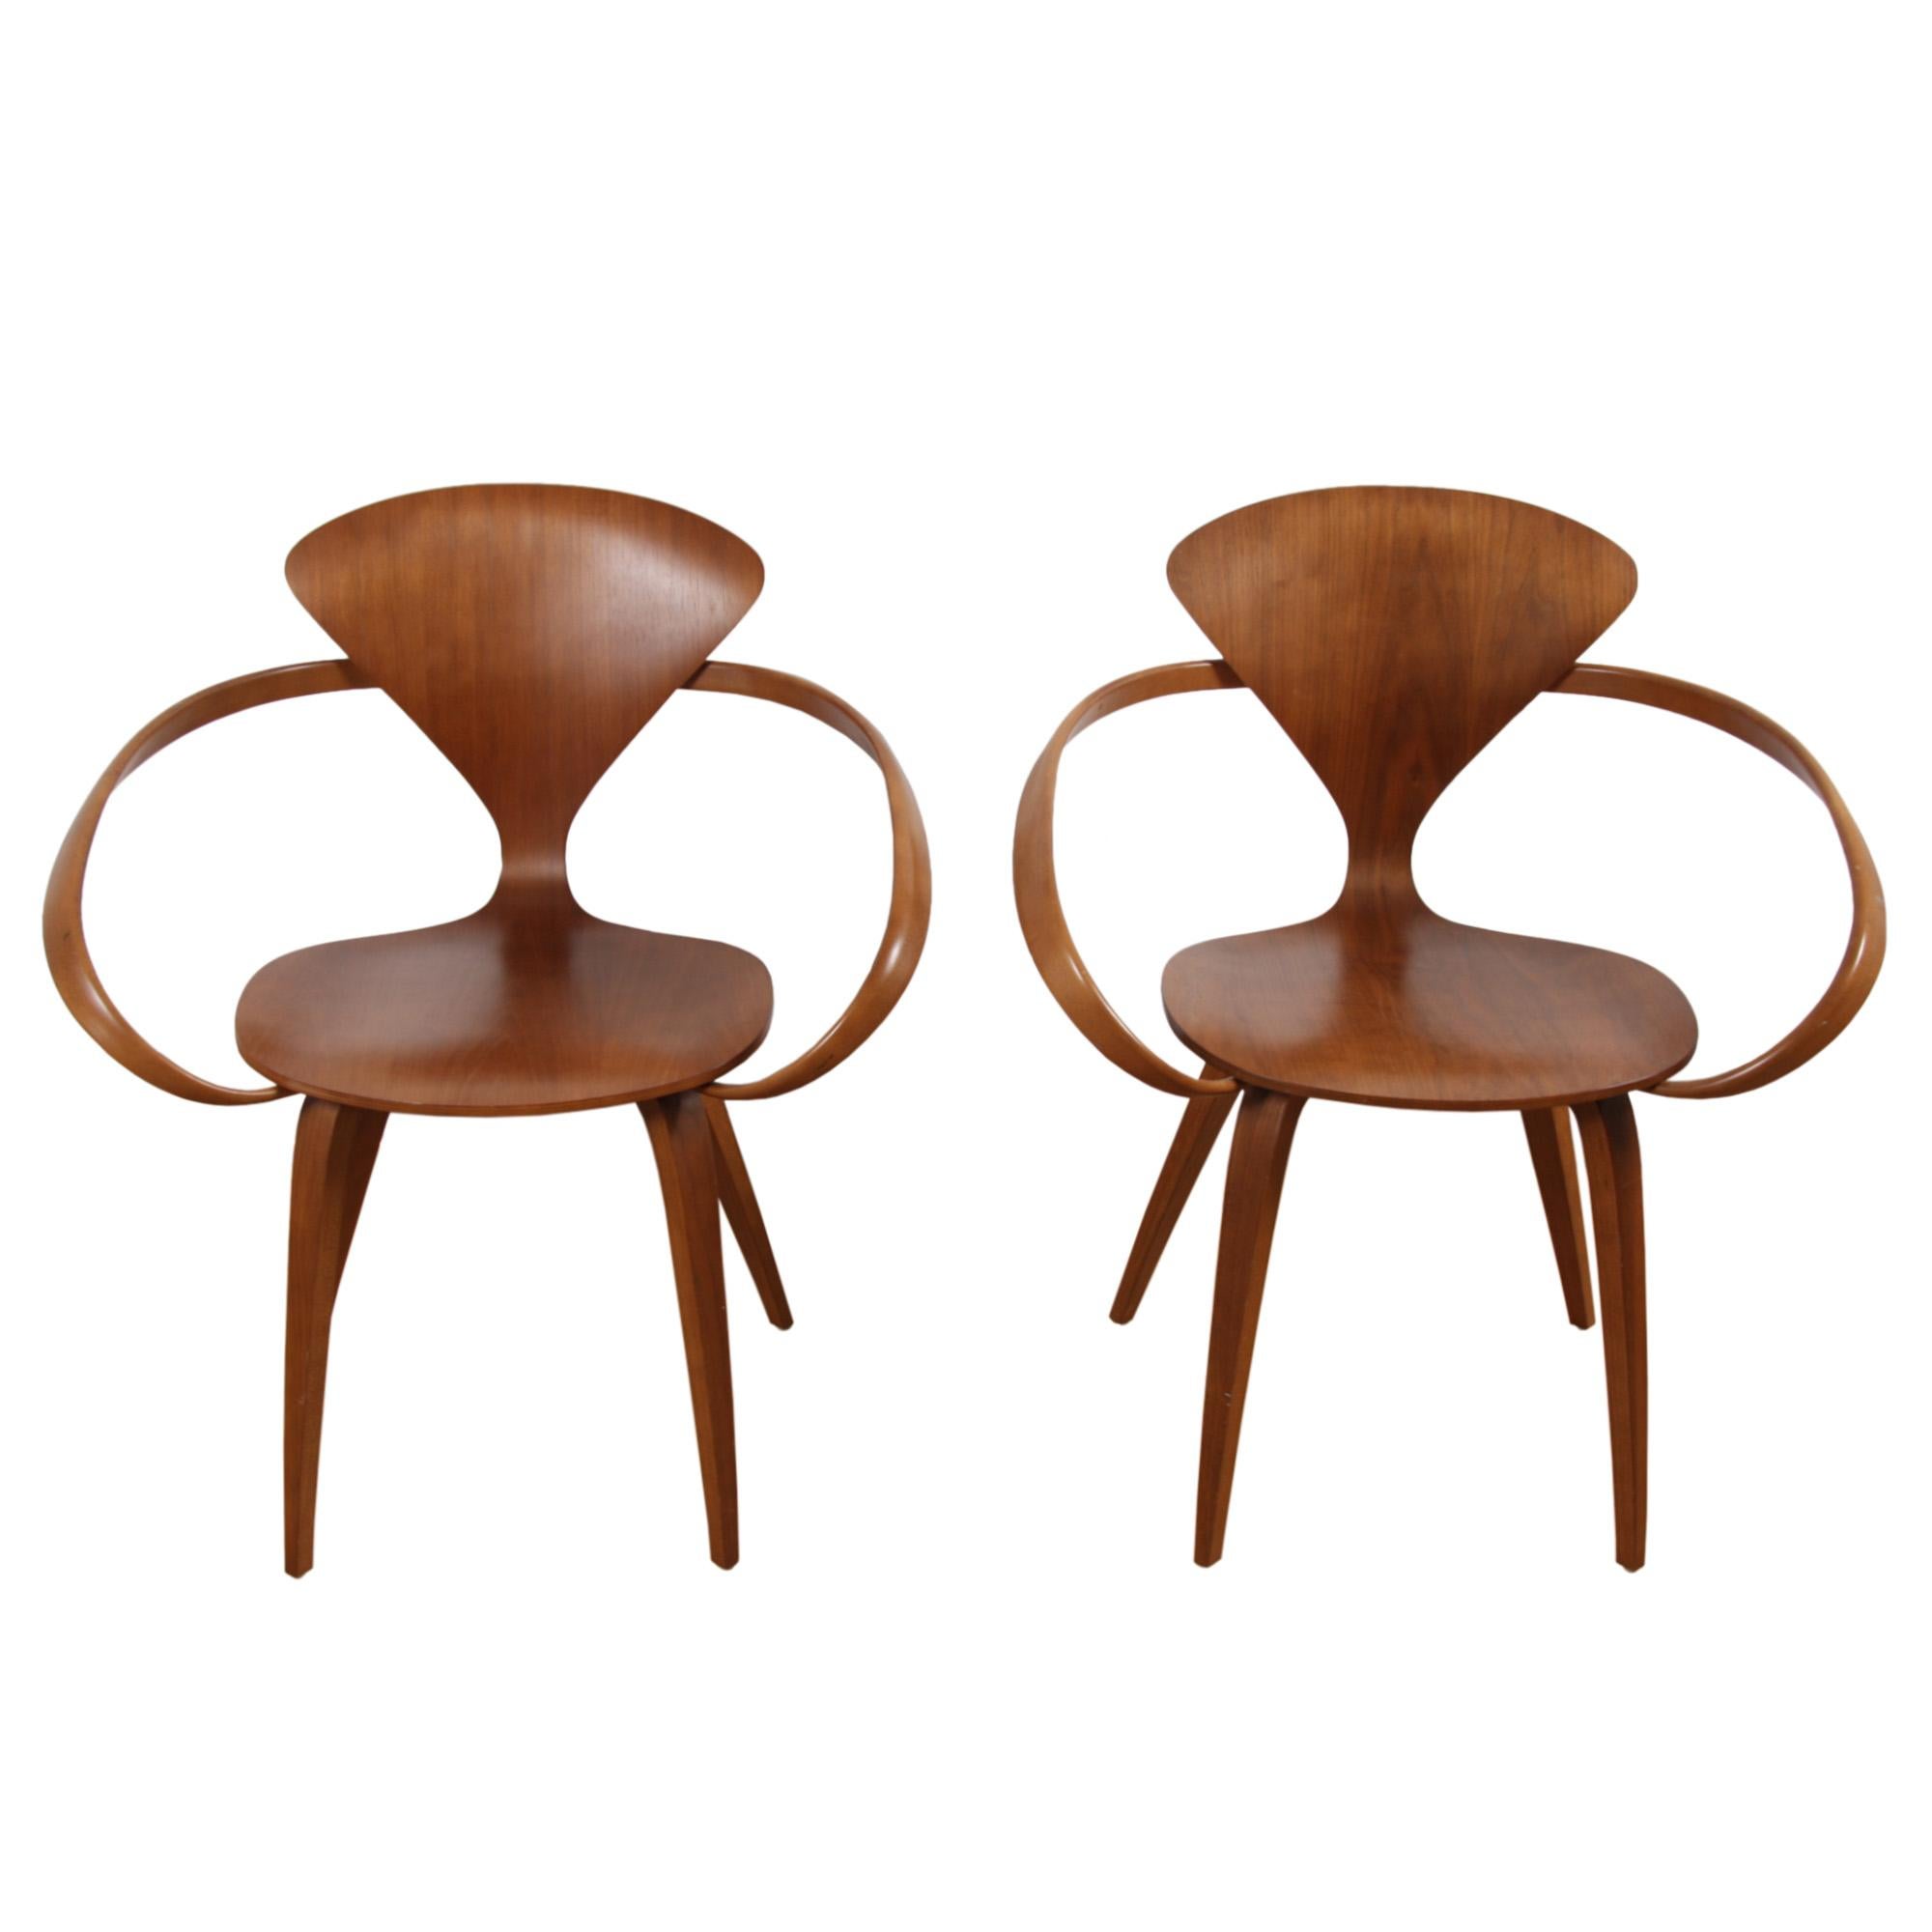 This is a pair of walnut veneered plywood chairs made by the Cherner Chair Company in the United States. A classic modern design, featuring the 'wasp waist' silhouette.

Norman Cherner is considered a hero of modern design. He studied and lectured